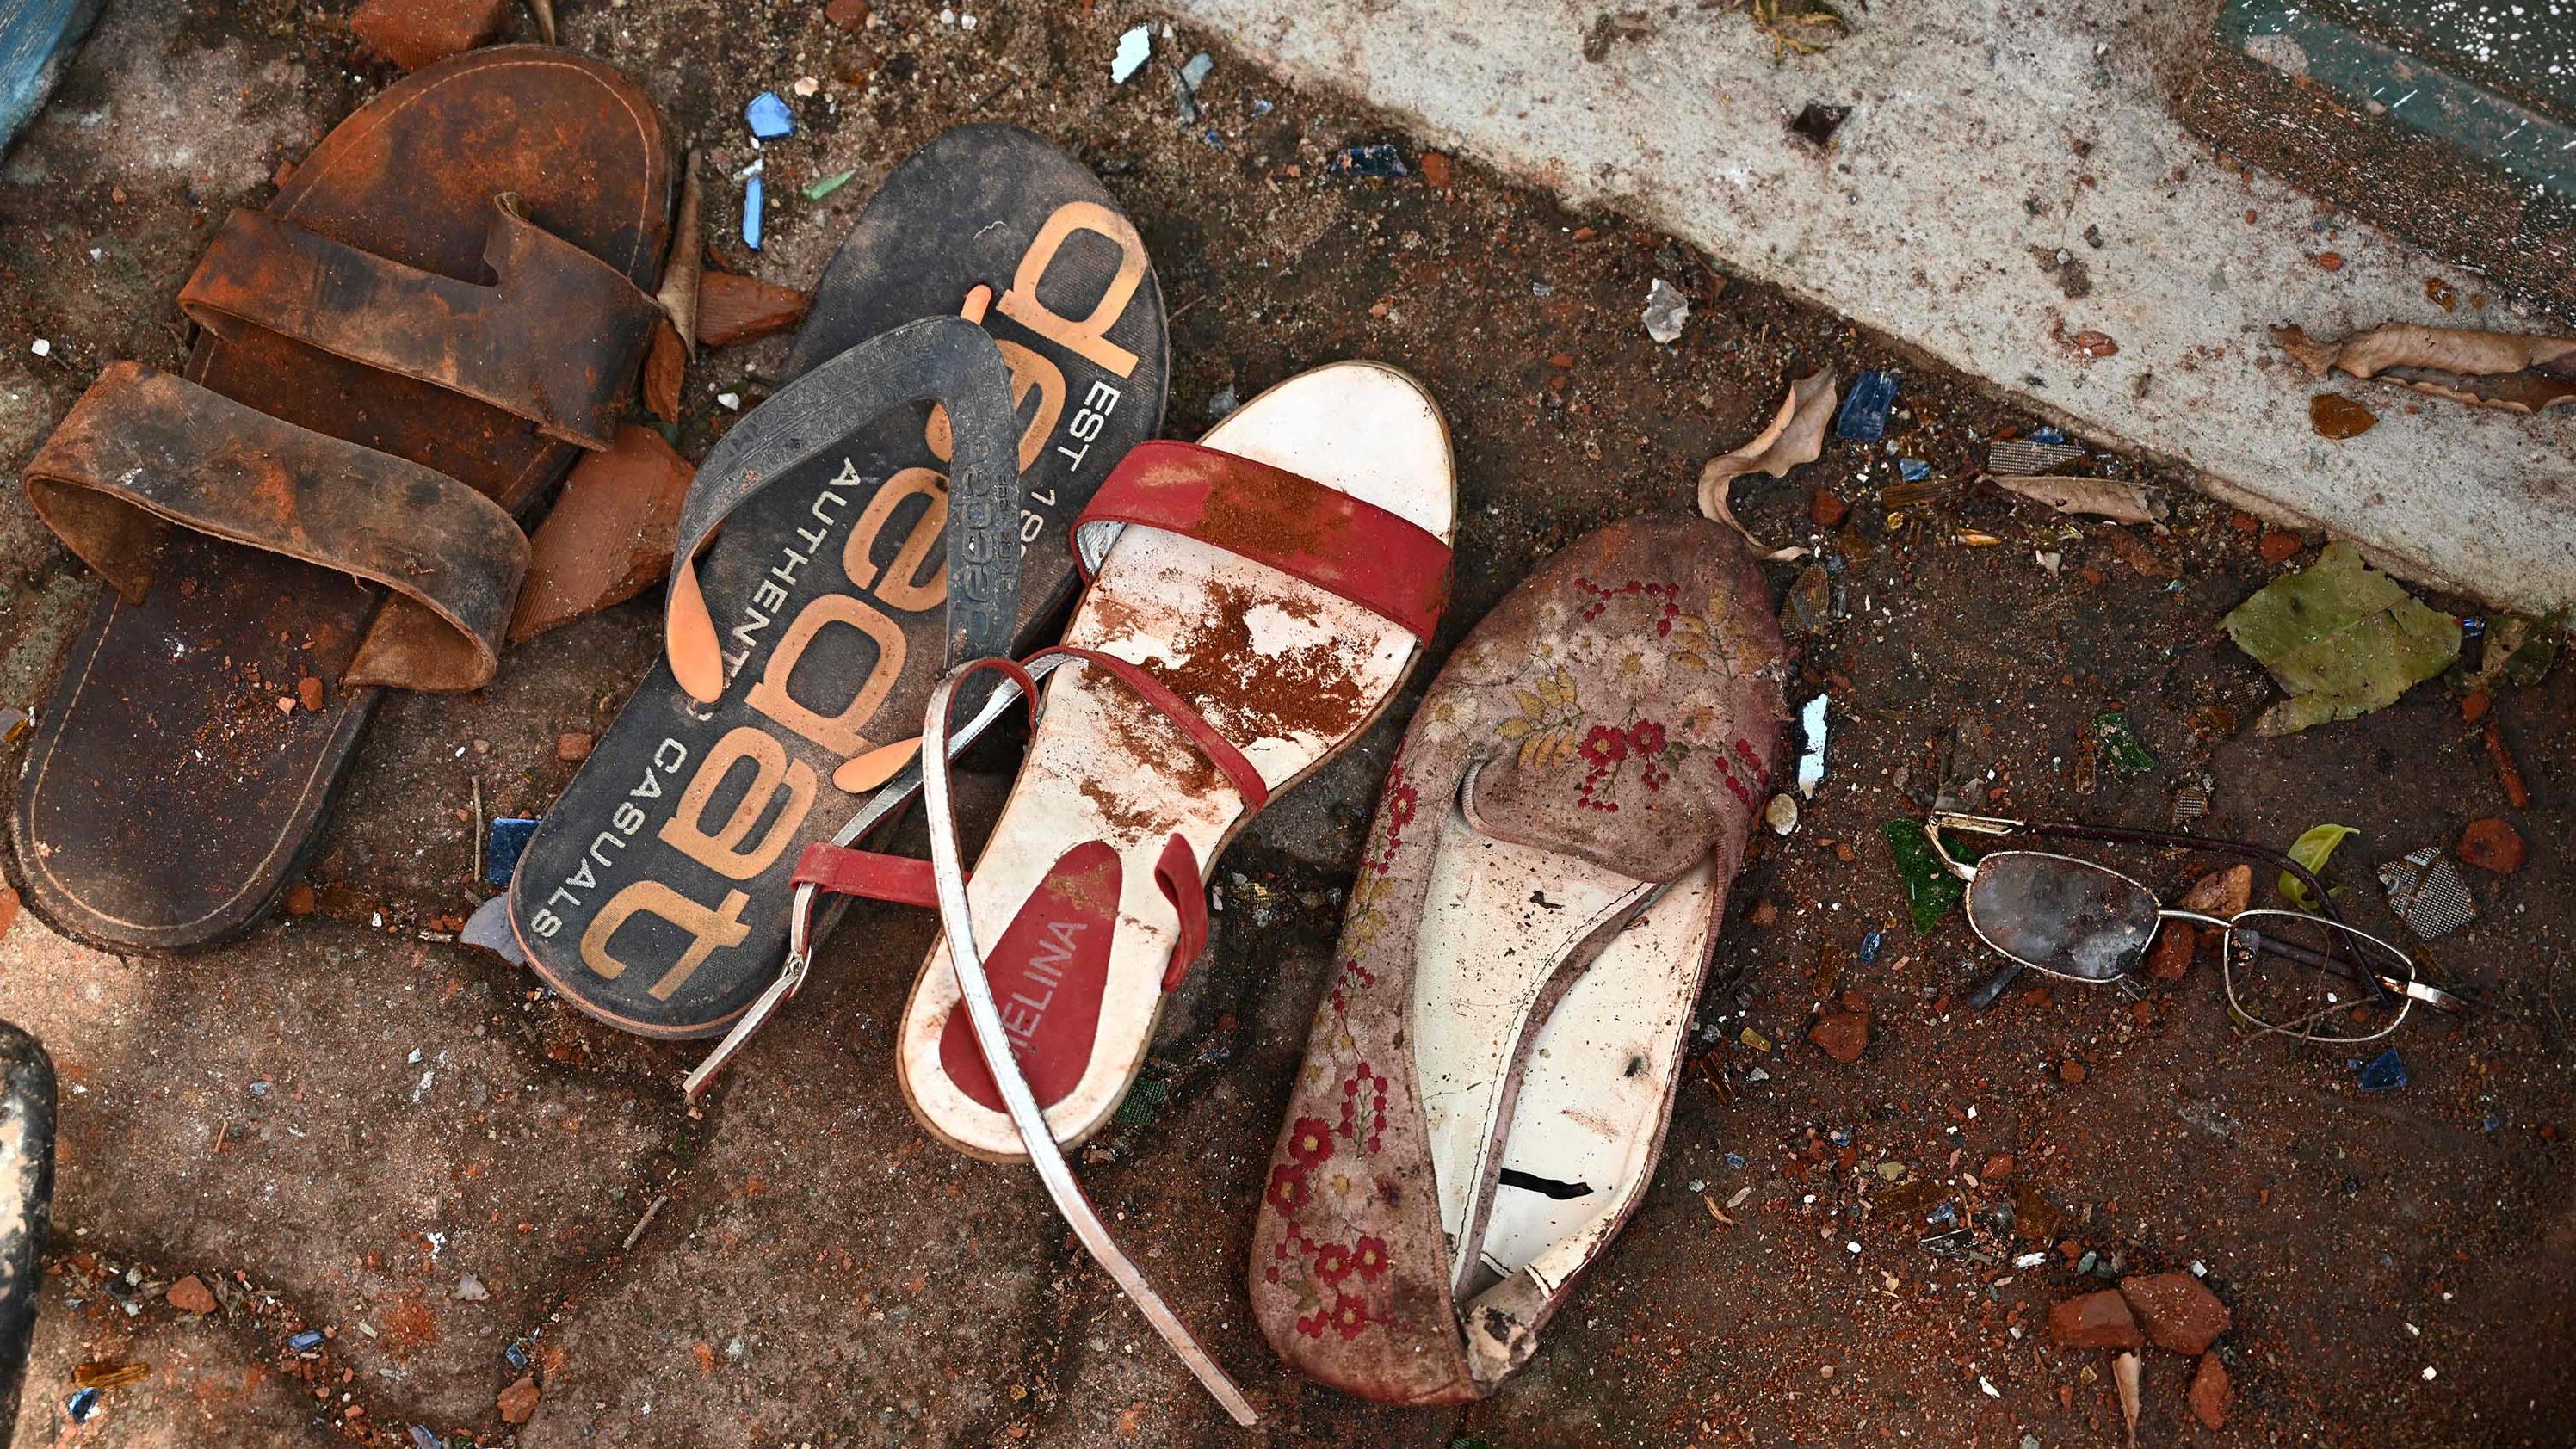 Shoes and belongings of victims are collected as evidence at St. Sebastian's Church in Negombo on April 22.